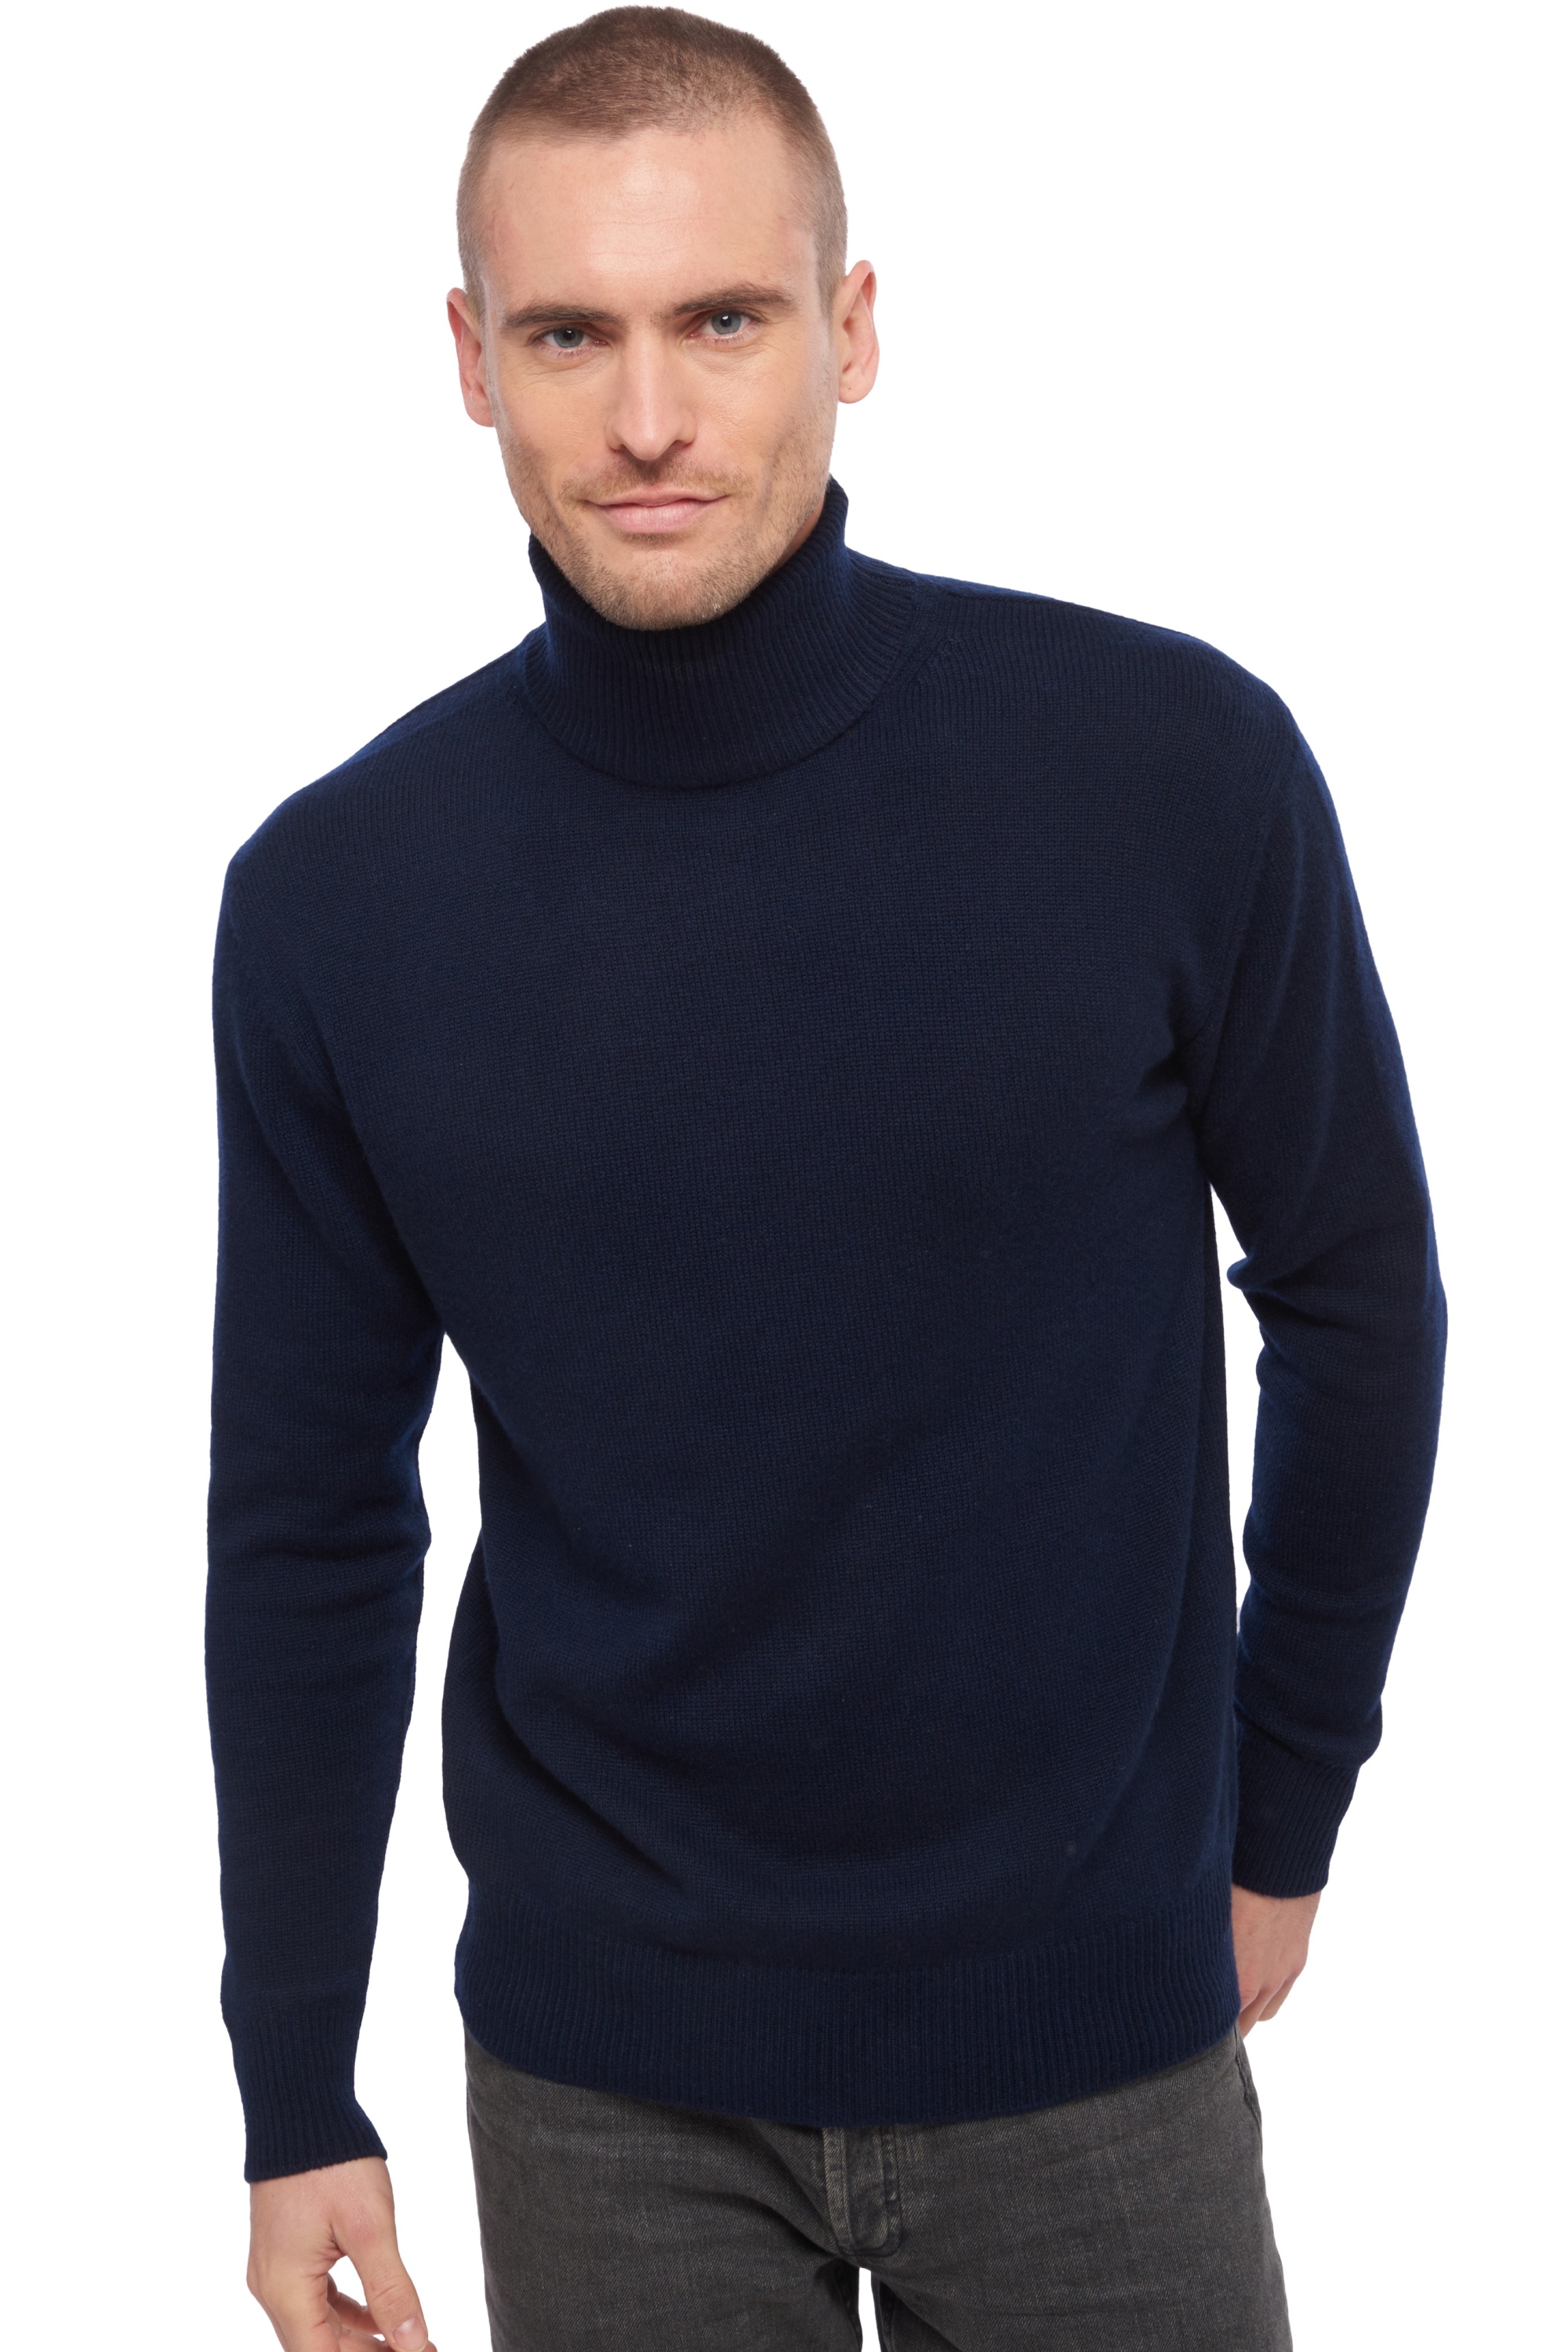 Cachemire pull homme col roule edgar 4f marine fonce xl